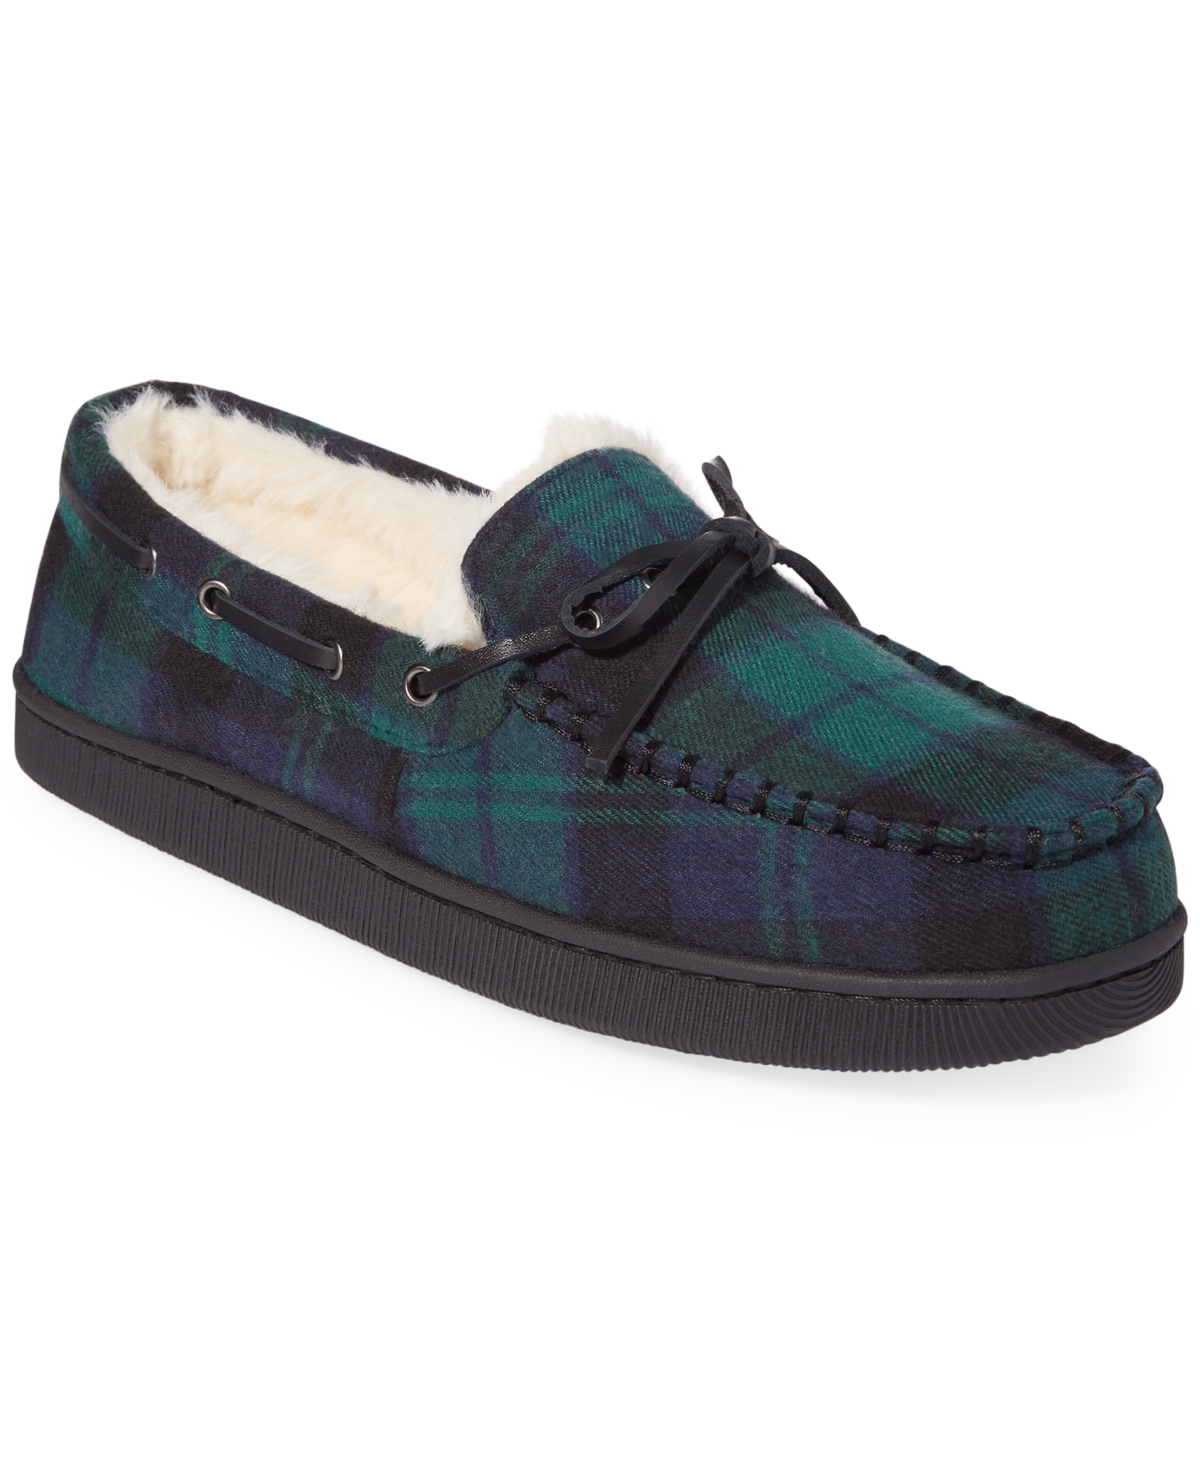 Men's Plaid Moccasin Slippers with Faux-Fur Lining, Created for Macy's - Green/blue